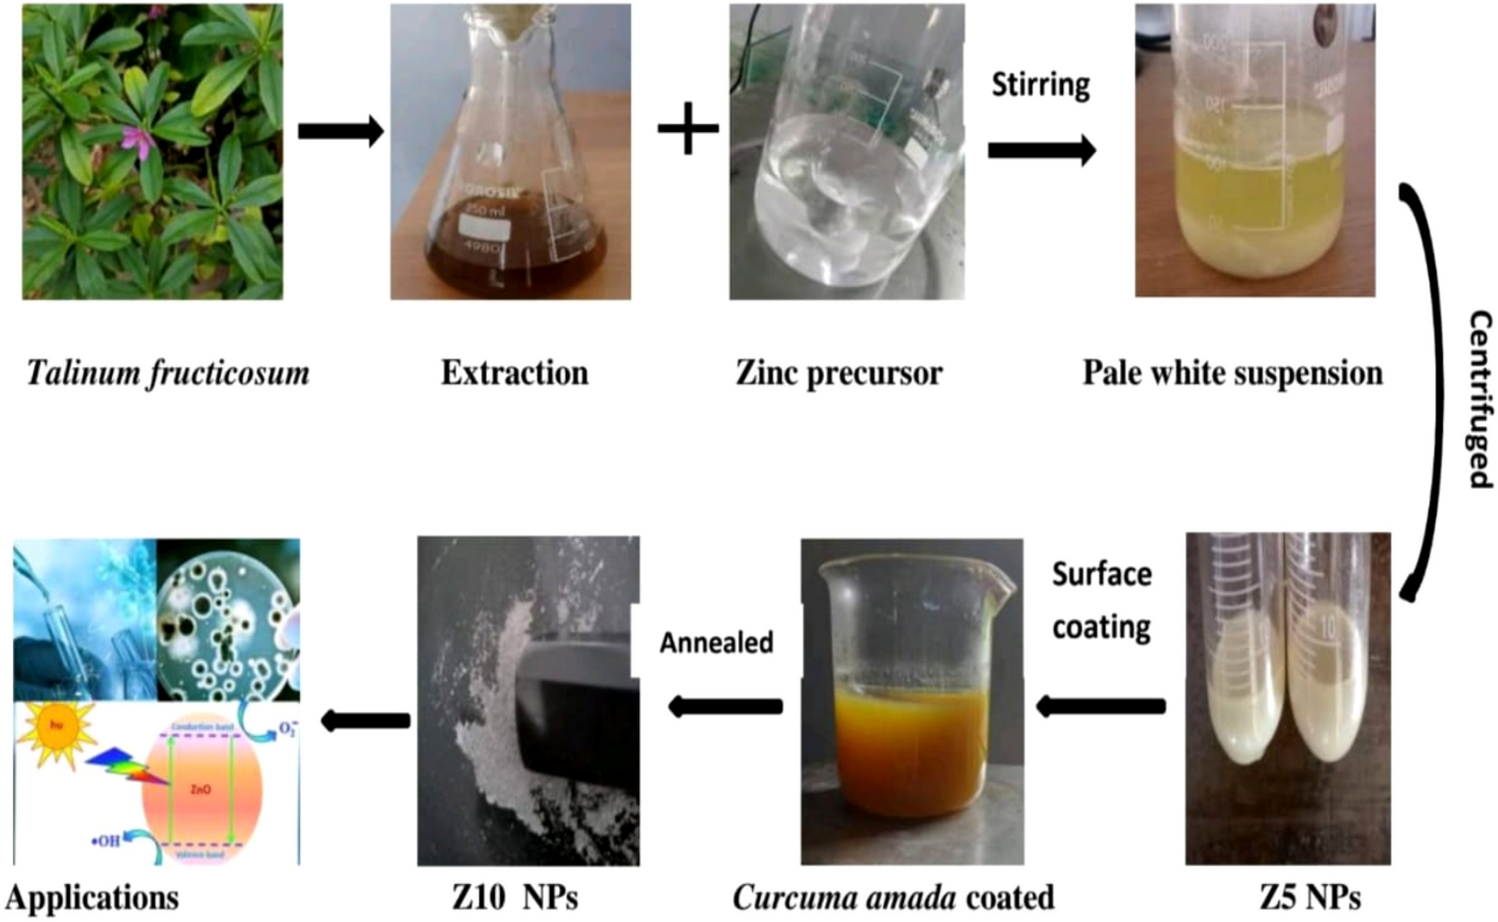 Synergistic effects of Curcuma amada functionalized ZnO nanostructures: bioactivity, catalytic, photocatalytic, and supercapacitor application